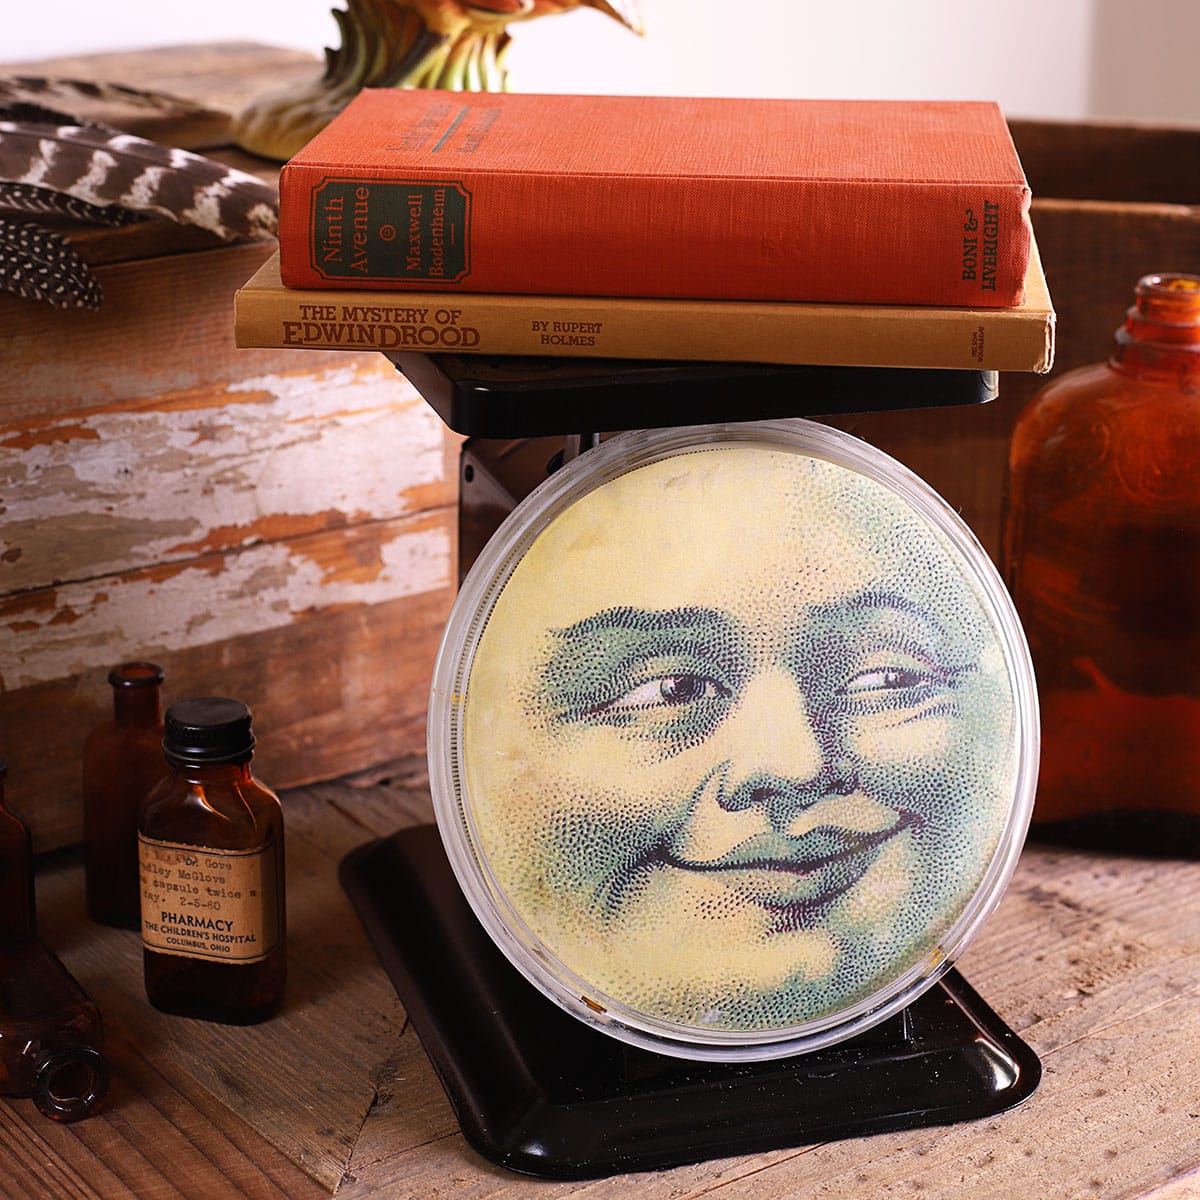 Vintage metal kitchen sdcale repurposed with a man in the moon face on the scale plate. 